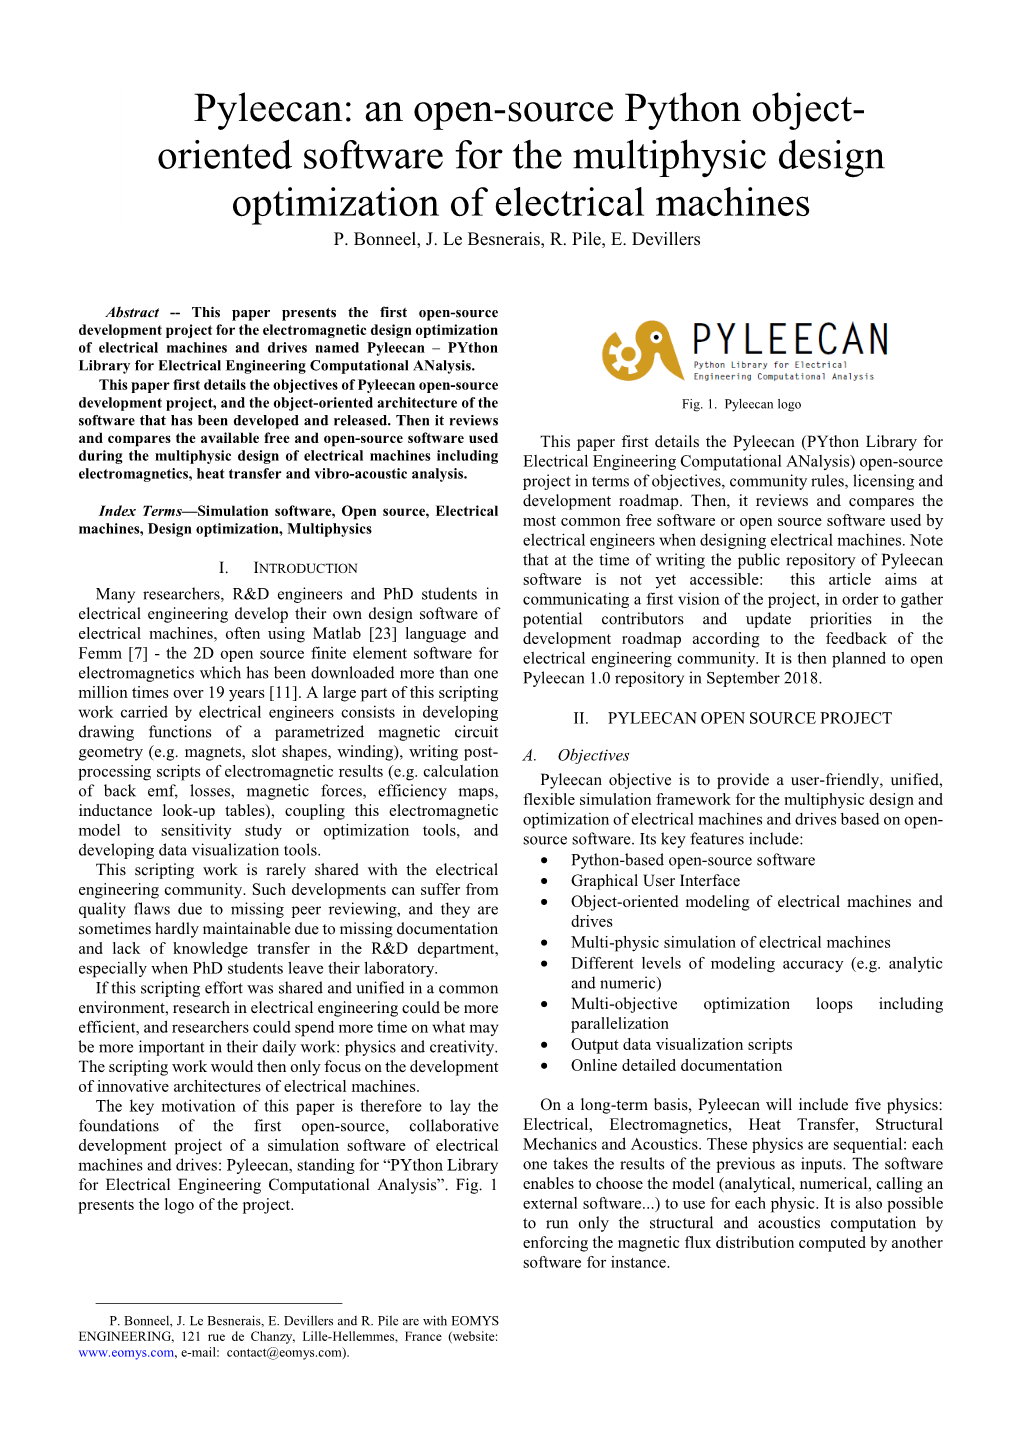 Pyleecan: an Open-Source Python Object- Oriented Software for the Multiphysic Design Optimization of Electrical Machines P